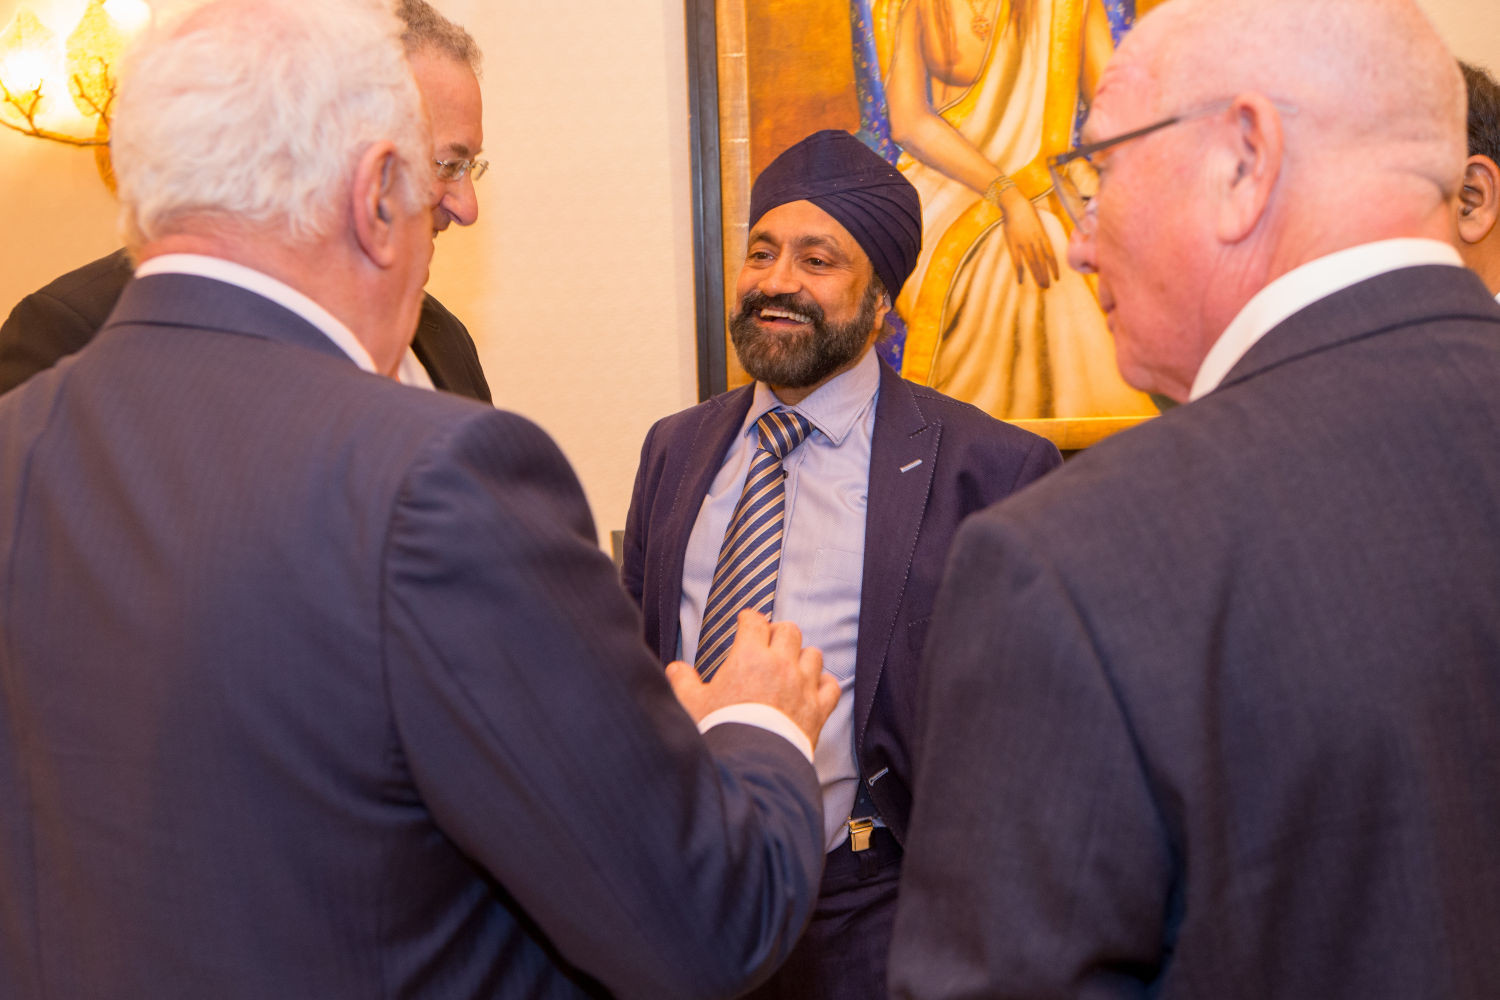 Sukhpal Singh Ahluwalia speaking at an event